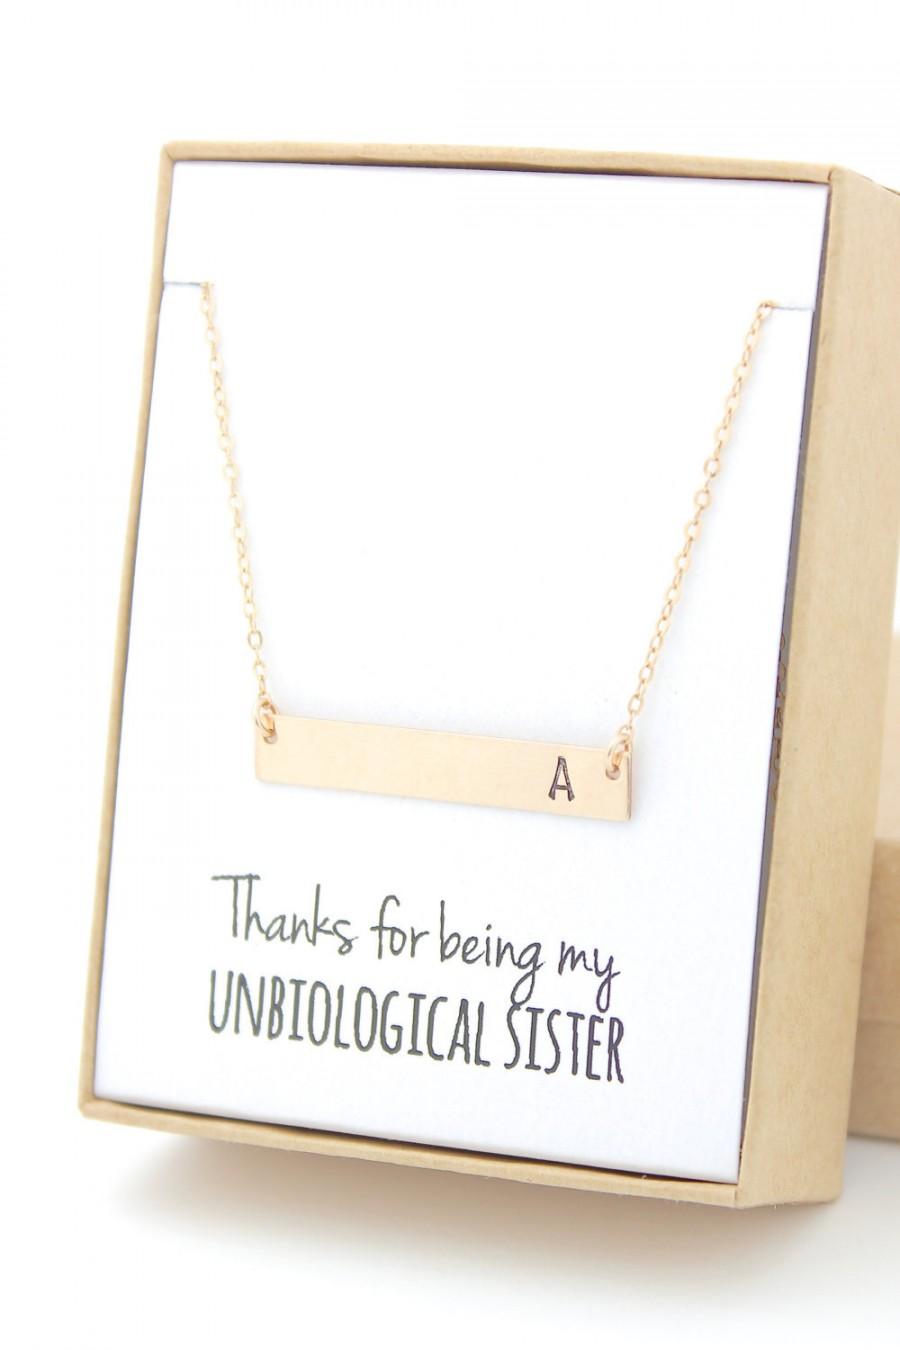 Mariage - Gold Bar Necklace - Bridesmaid Gift Jewelry - Thanks for Being My Unbiological Sister - Wedding Party - Bridal Party Gifts - Initial Letter